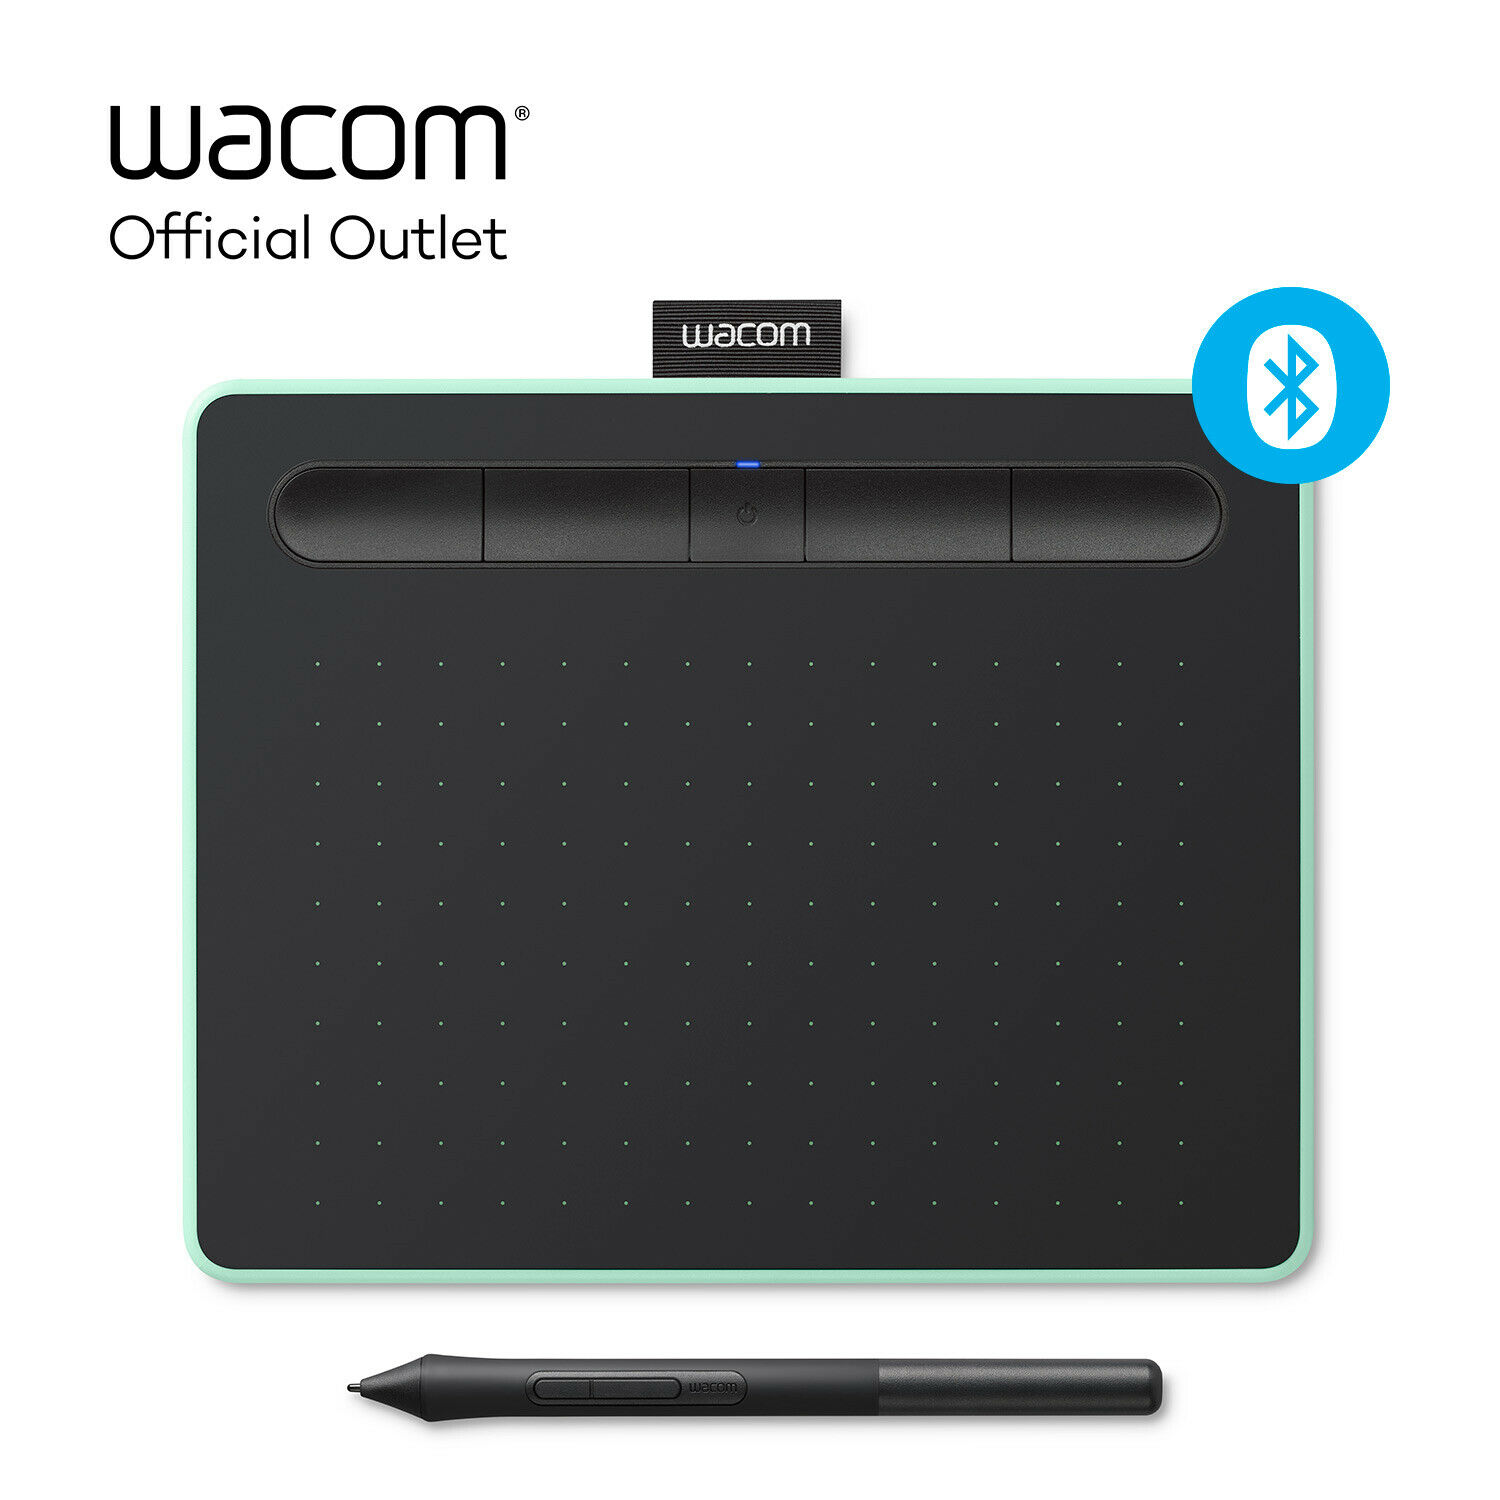 Certified Refurbished Wacom Intuos Small Wireless Graphics Tablet - Pistachio